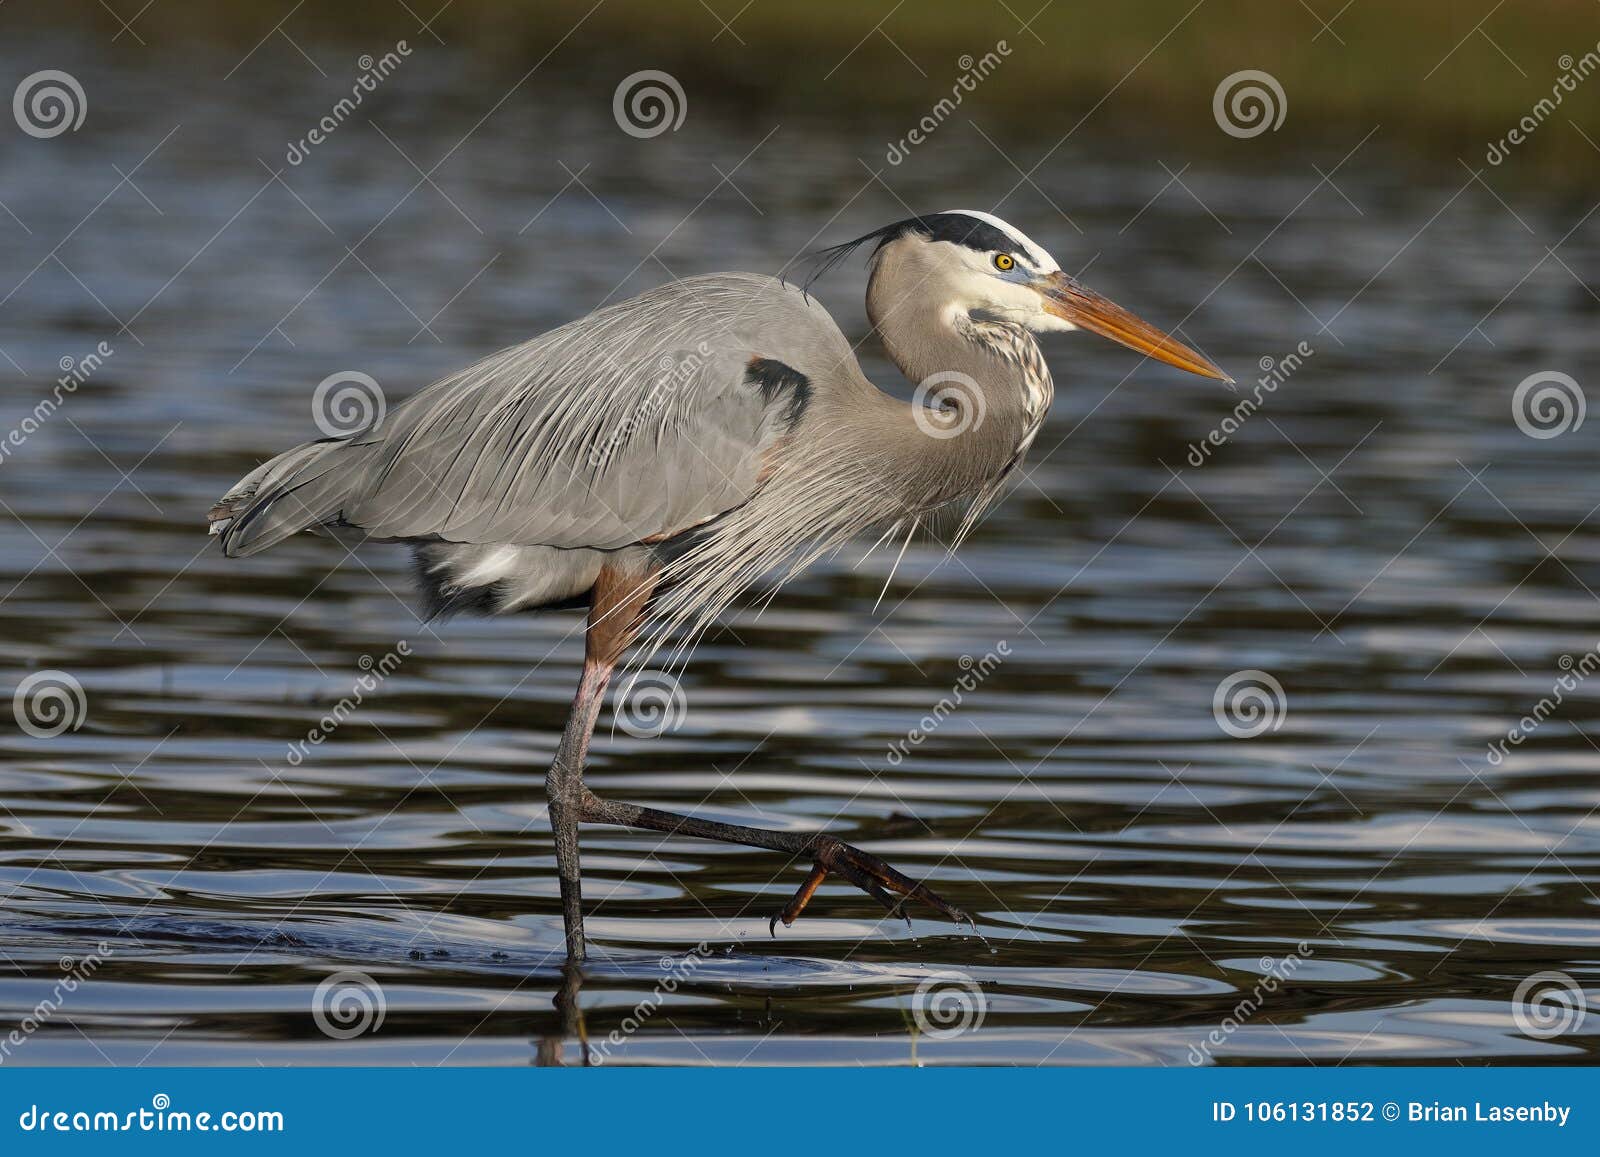 great blue heron wading in a shallow florida pond